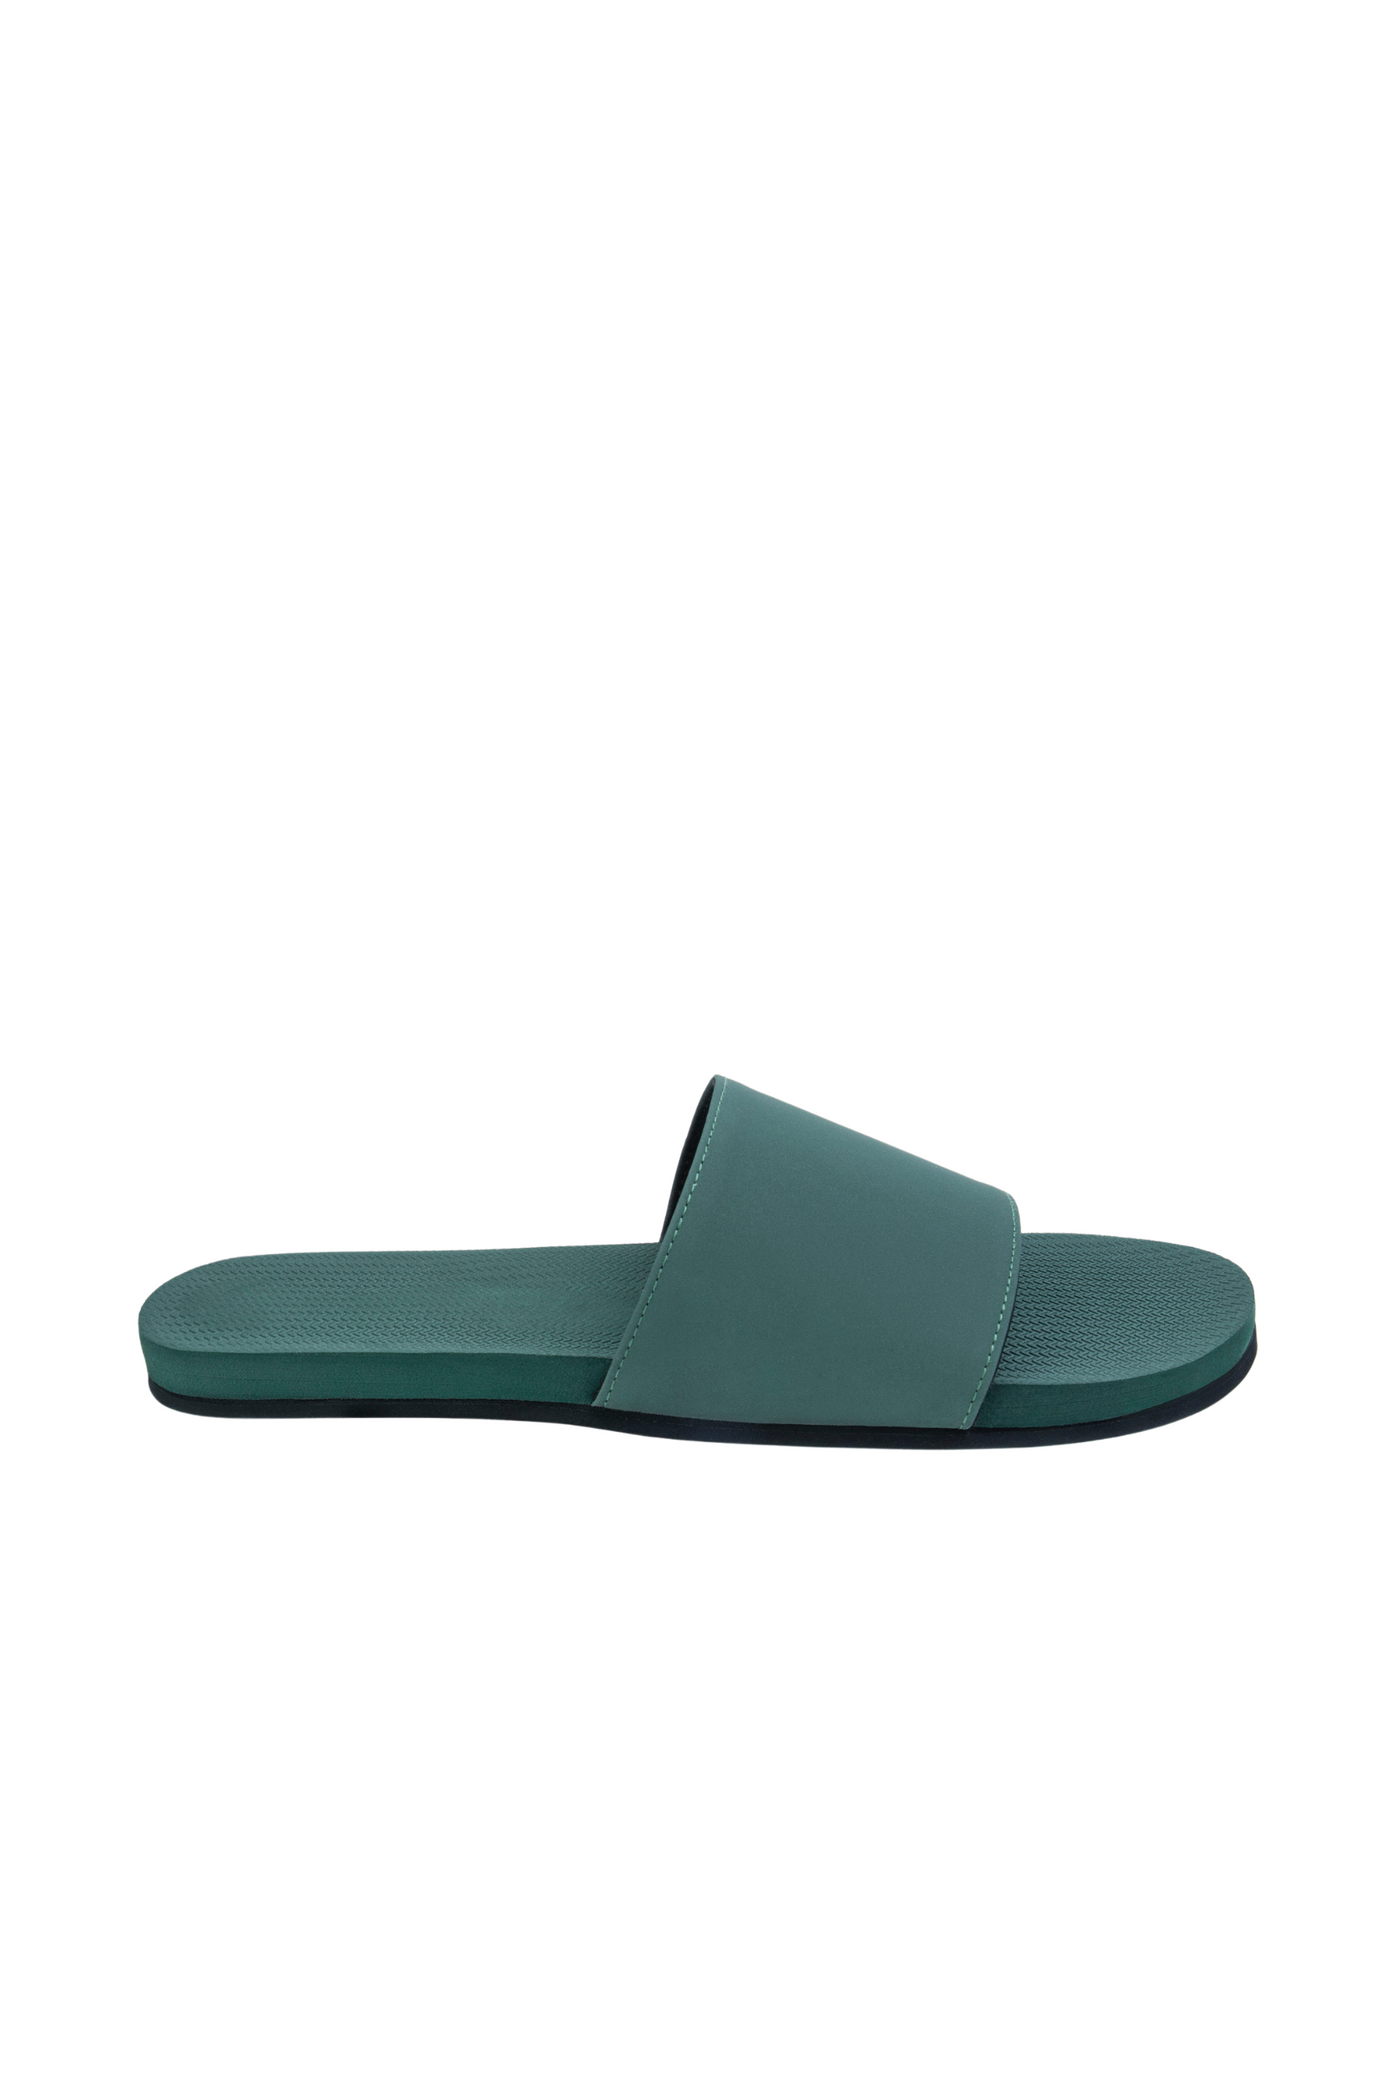 Indosole Women’s ESSNTLS Slides in Leaf, available on ZERRIN with free Singapore shipping